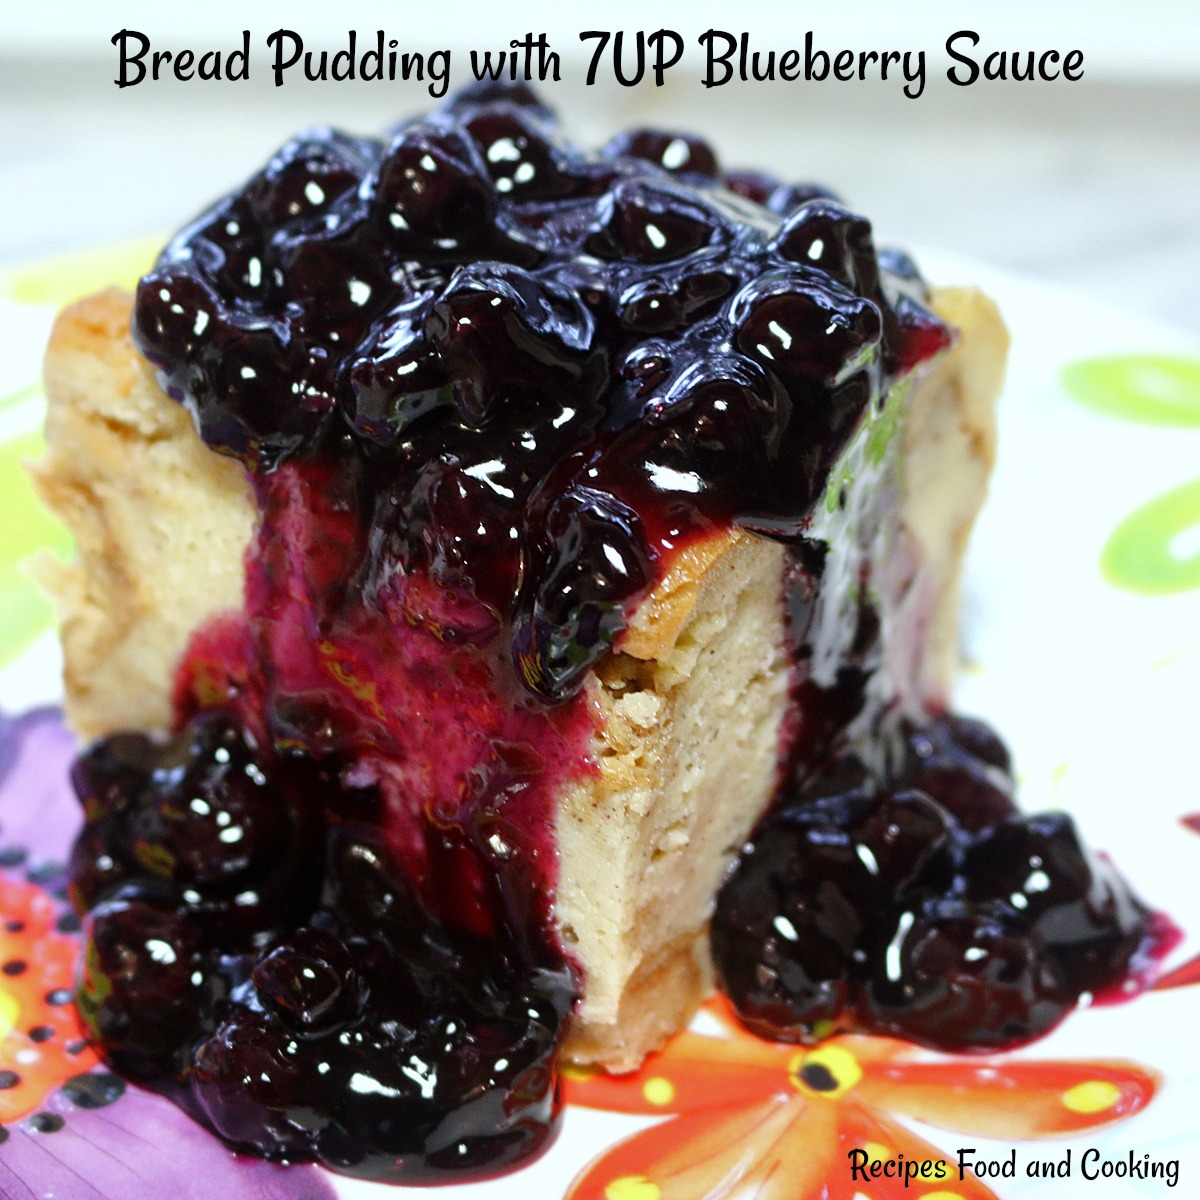 Bread Pudding with 7UP Blueberry Sauce